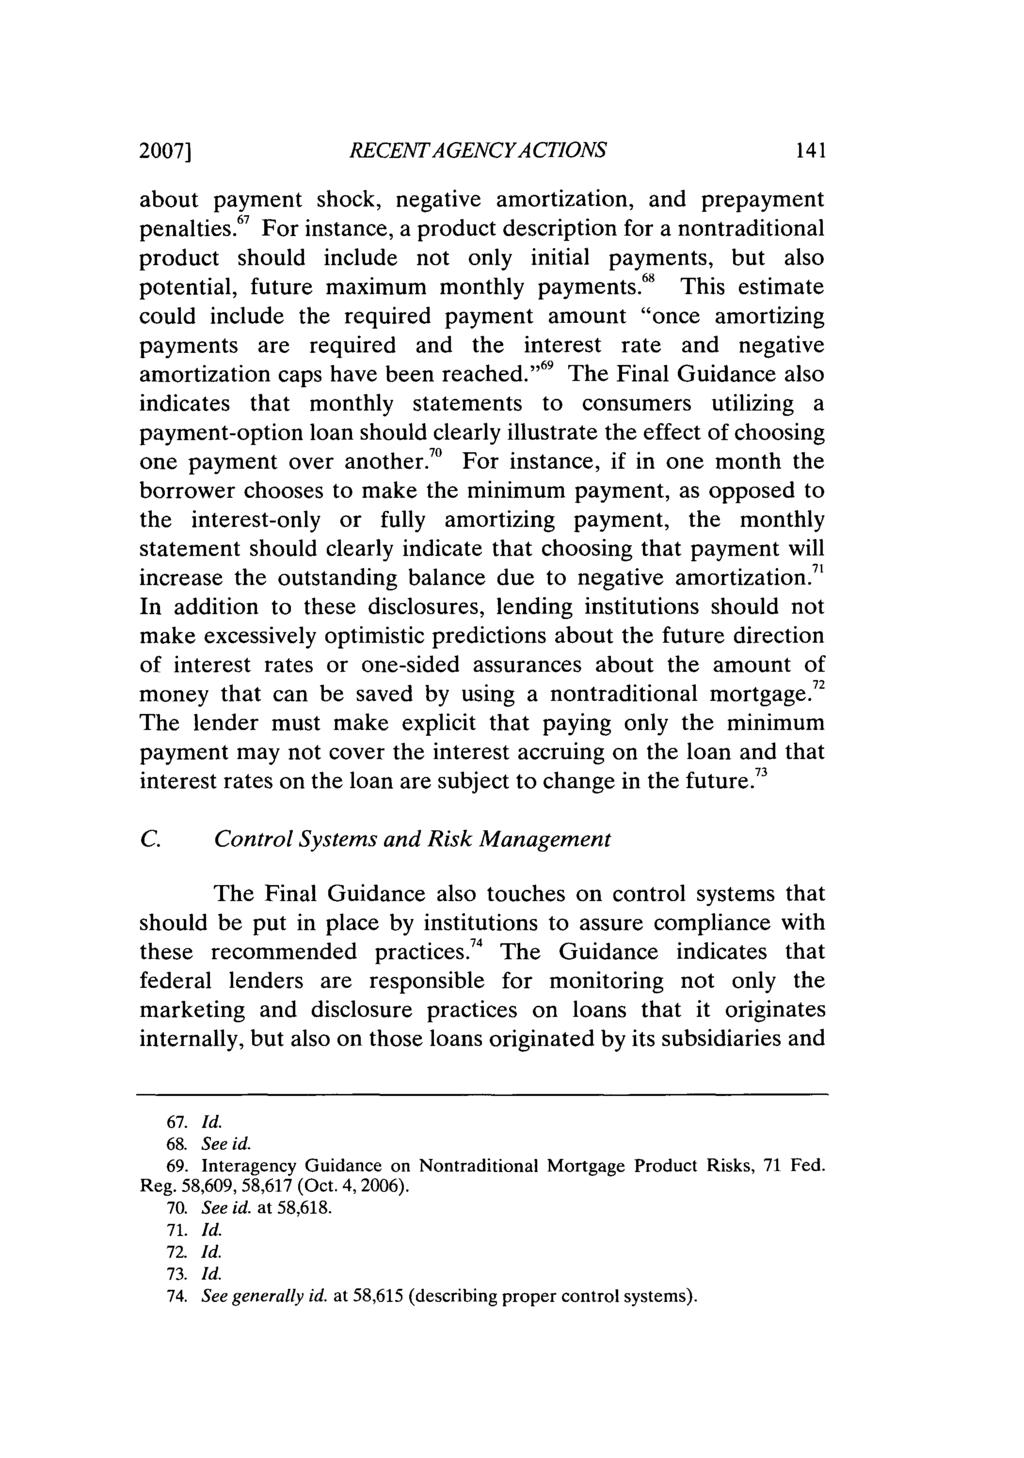 2007] RECENTAGENCYACTIONS about payment shock, negative amortization, and prepayment penalties.